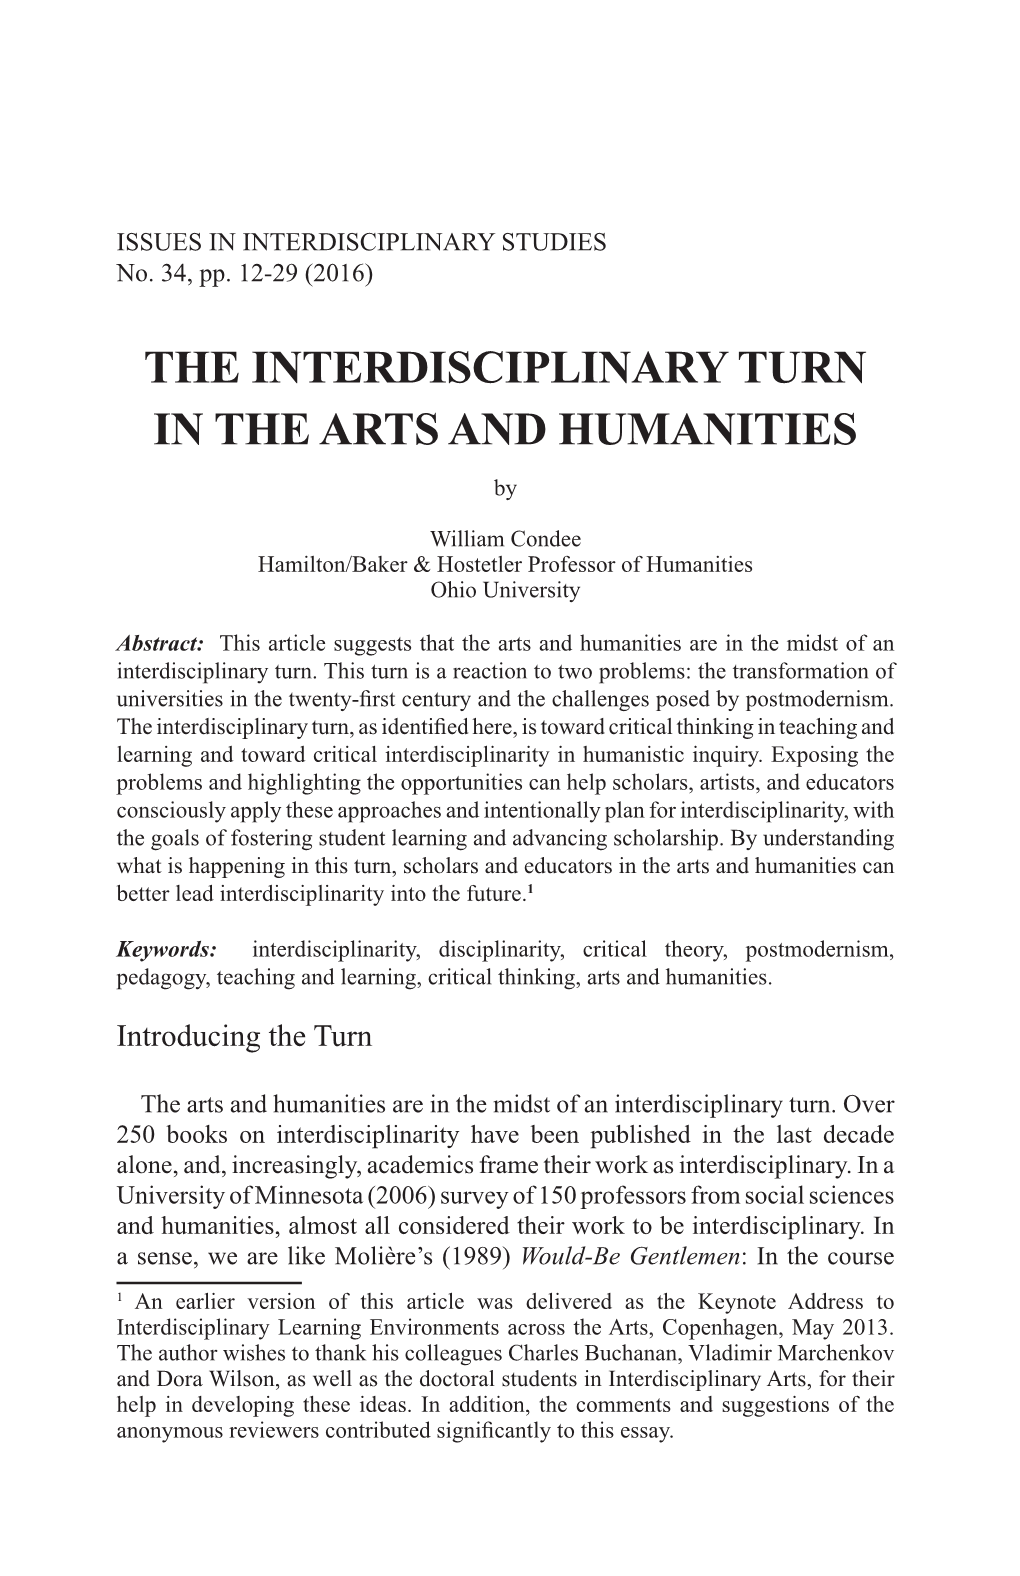 THE INTERDISCIPLINARY TURN in the ARTS and HUMANITIES By